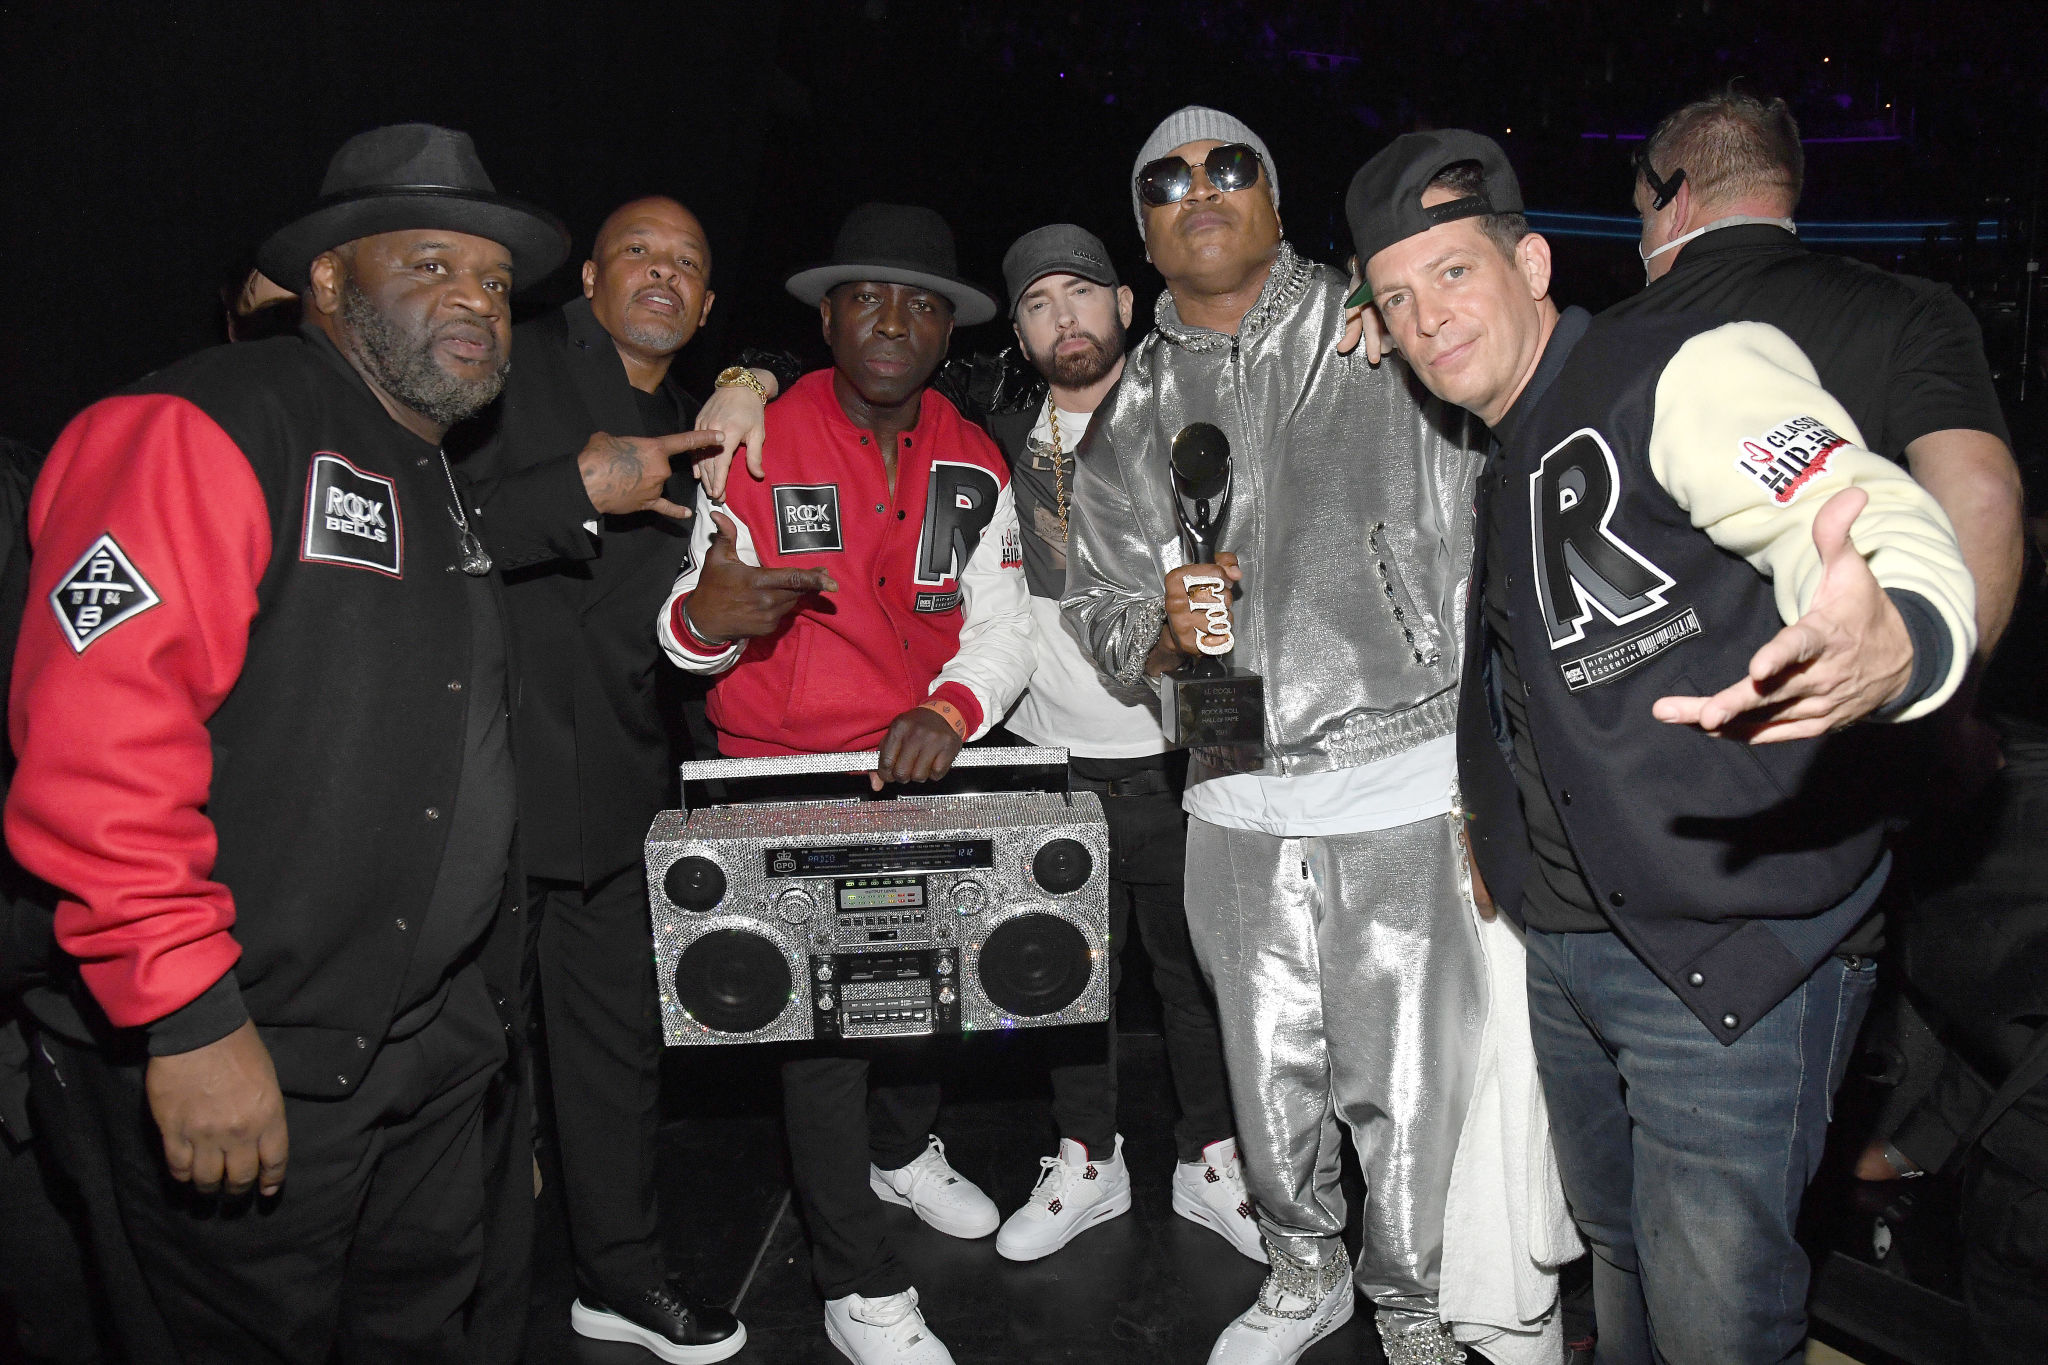 CLEVELAND, OHIO - OCTOBER 30: (L-R) DJ Cut Creator, Dr. Dre, E-Love, Eminem, LL Cool J and DJ Z-Trip pose backstage during the 36th Annual Rock & Roll Hall Of Fame Induction Ceremony at Rocket Mortgage Fieldhouse on October 30, 2021 in Cleveland, Ohio. (Photo by Kevin Mazur/Getty Images for The Rock and Roll Hall of Fame )